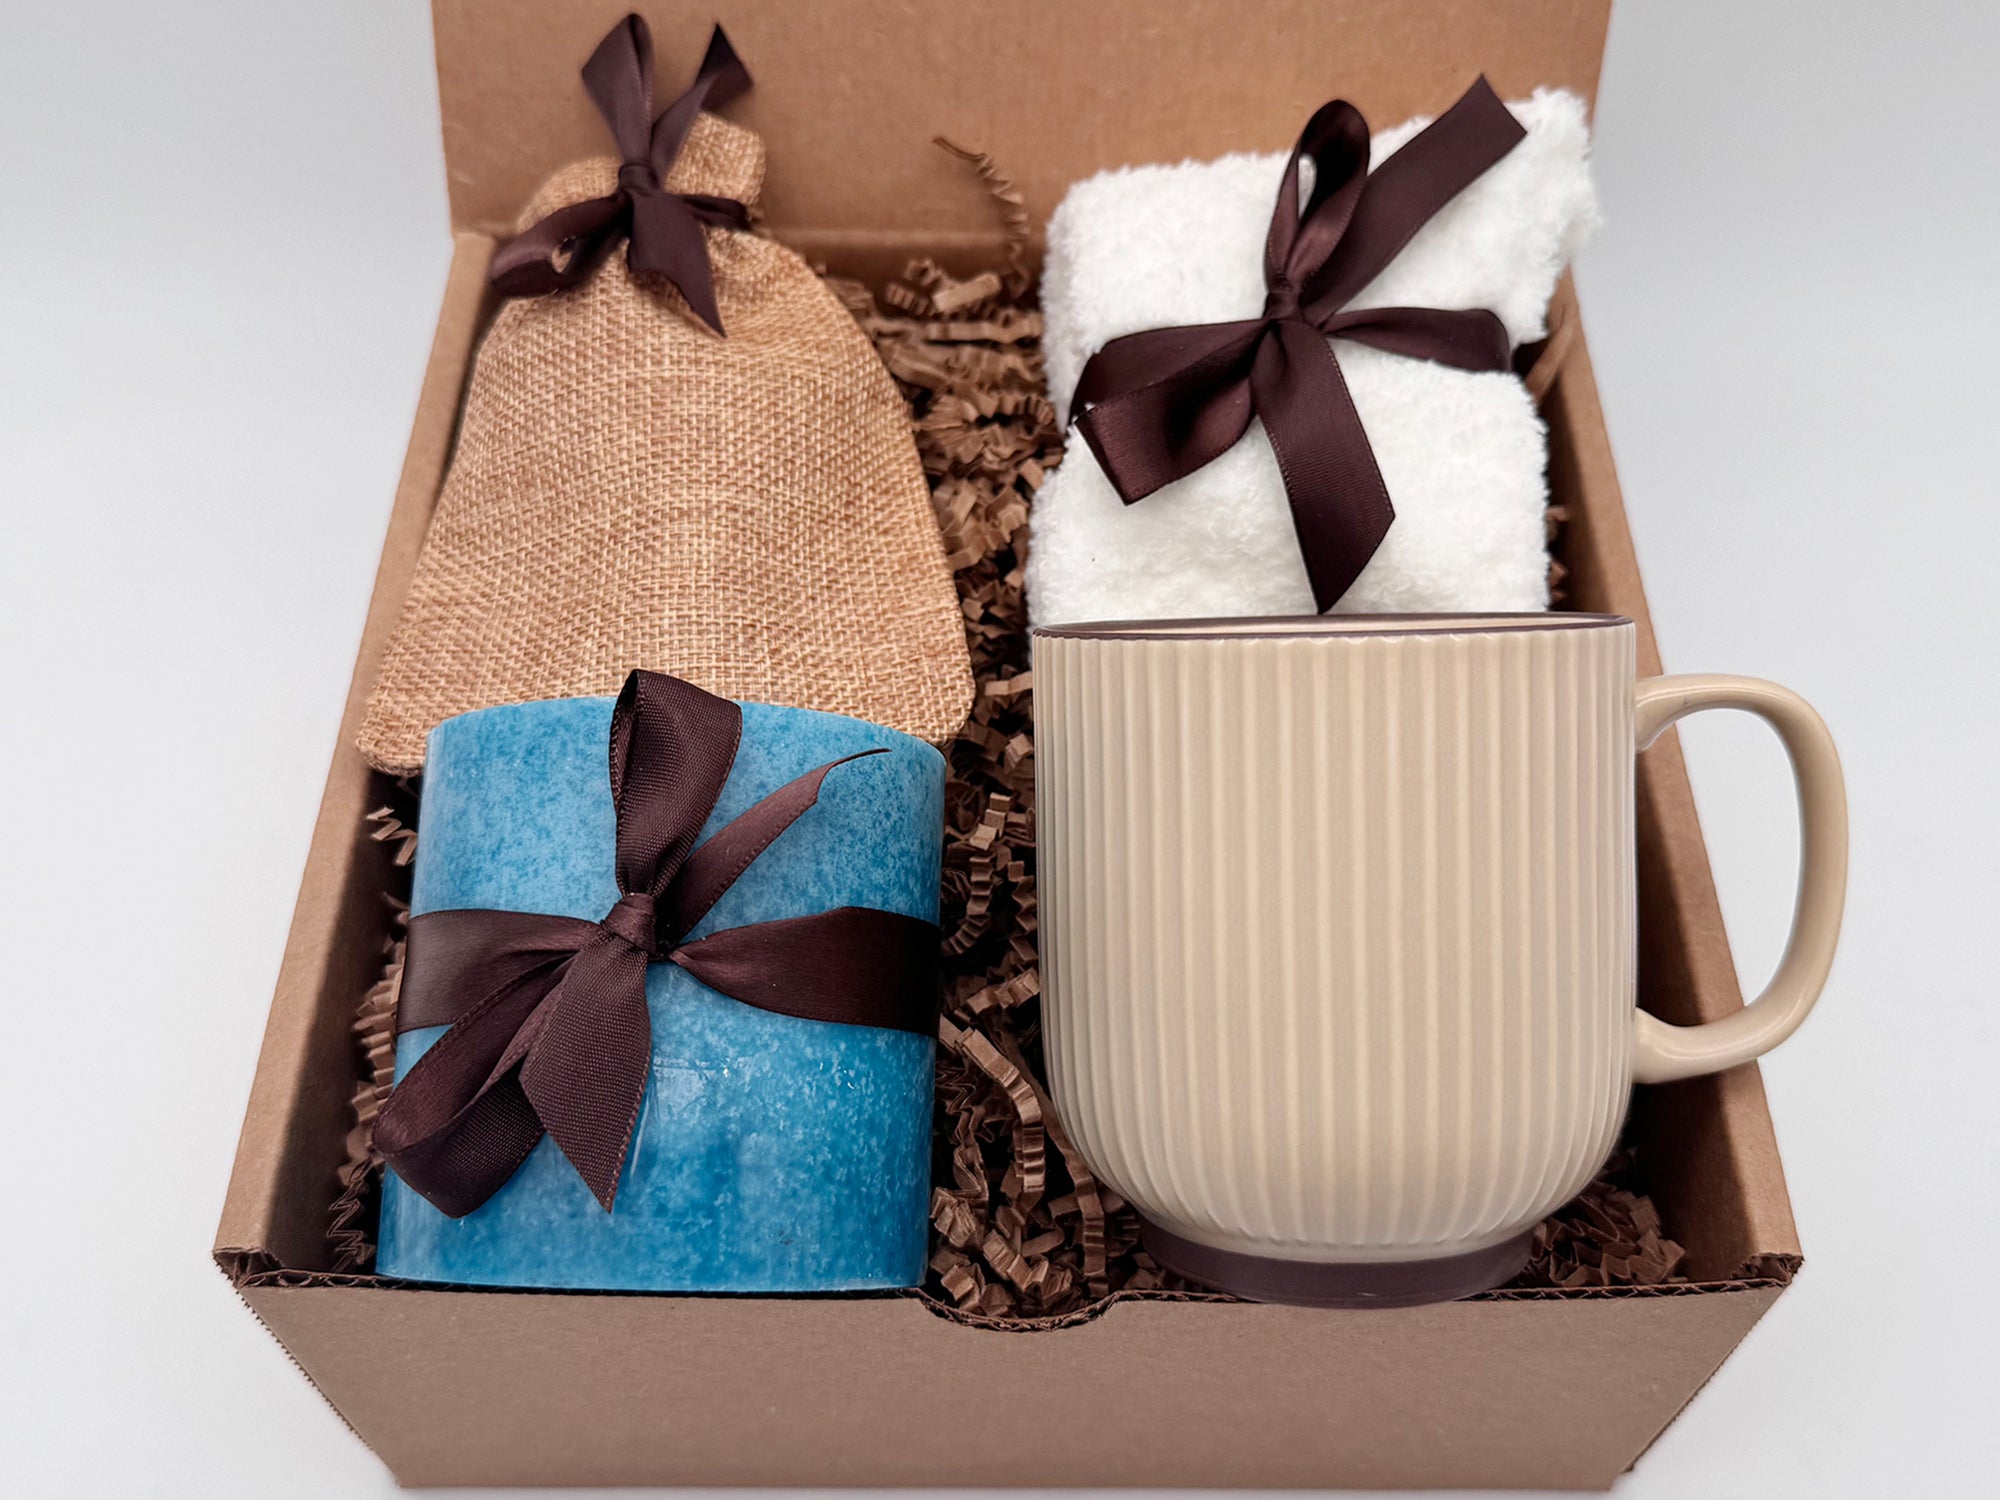 Gentle Gestures Gift Box | Small Cozy Birthday Gift for Your Loved One